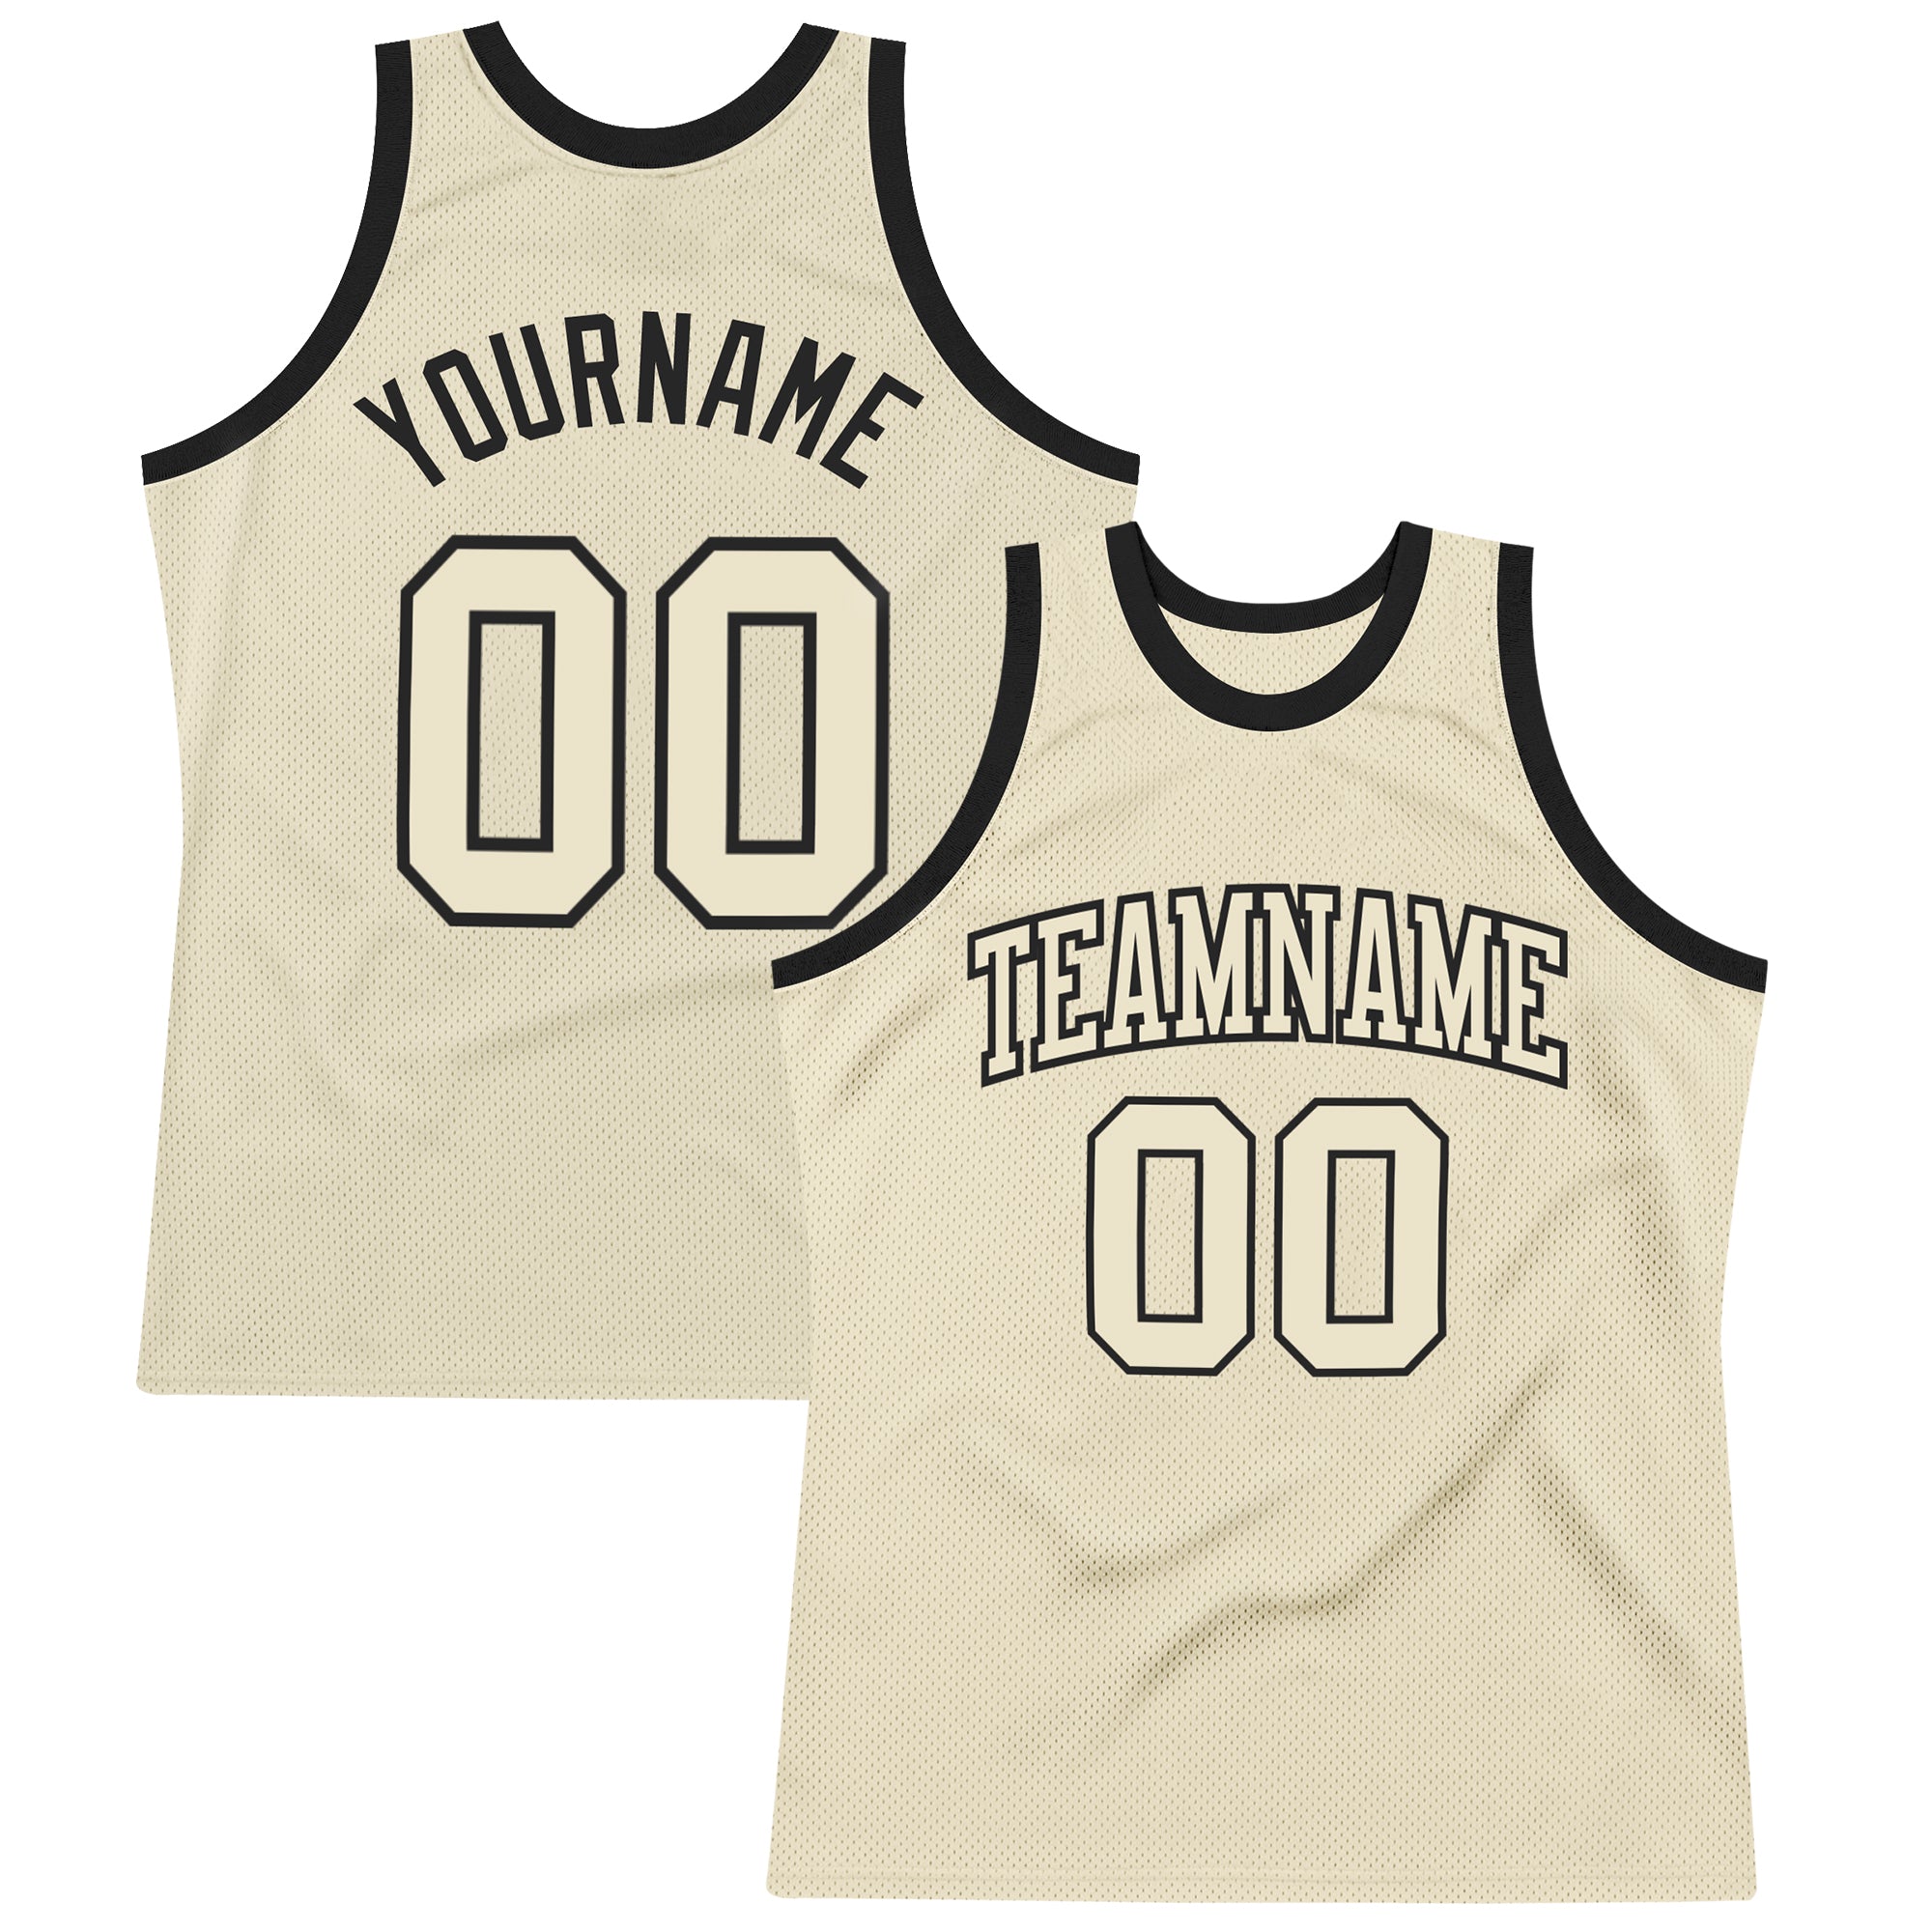 Custom Black Basketball Jersey-Old Gold Authentic Throwback - FansIdea